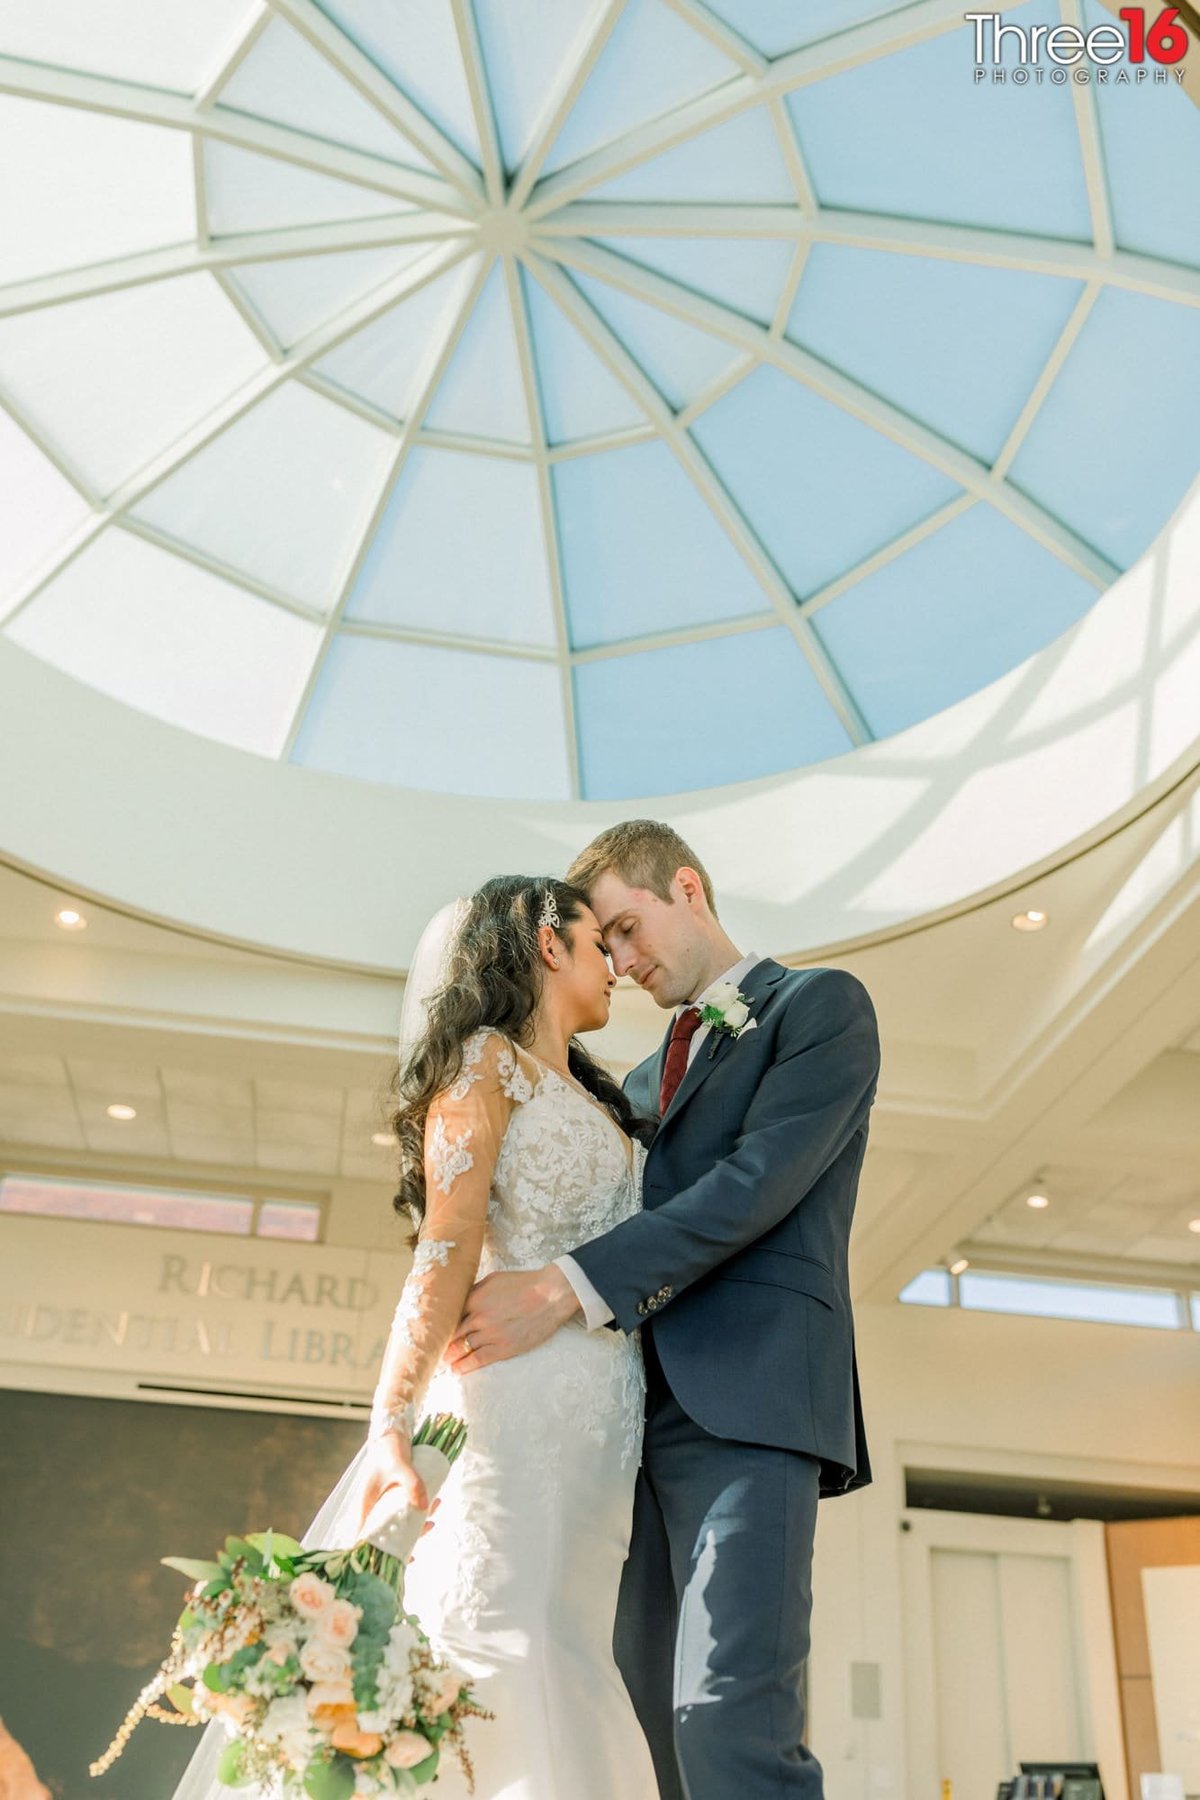 Bride and Groom embrace one another in the Richard Nixon Library lobby area